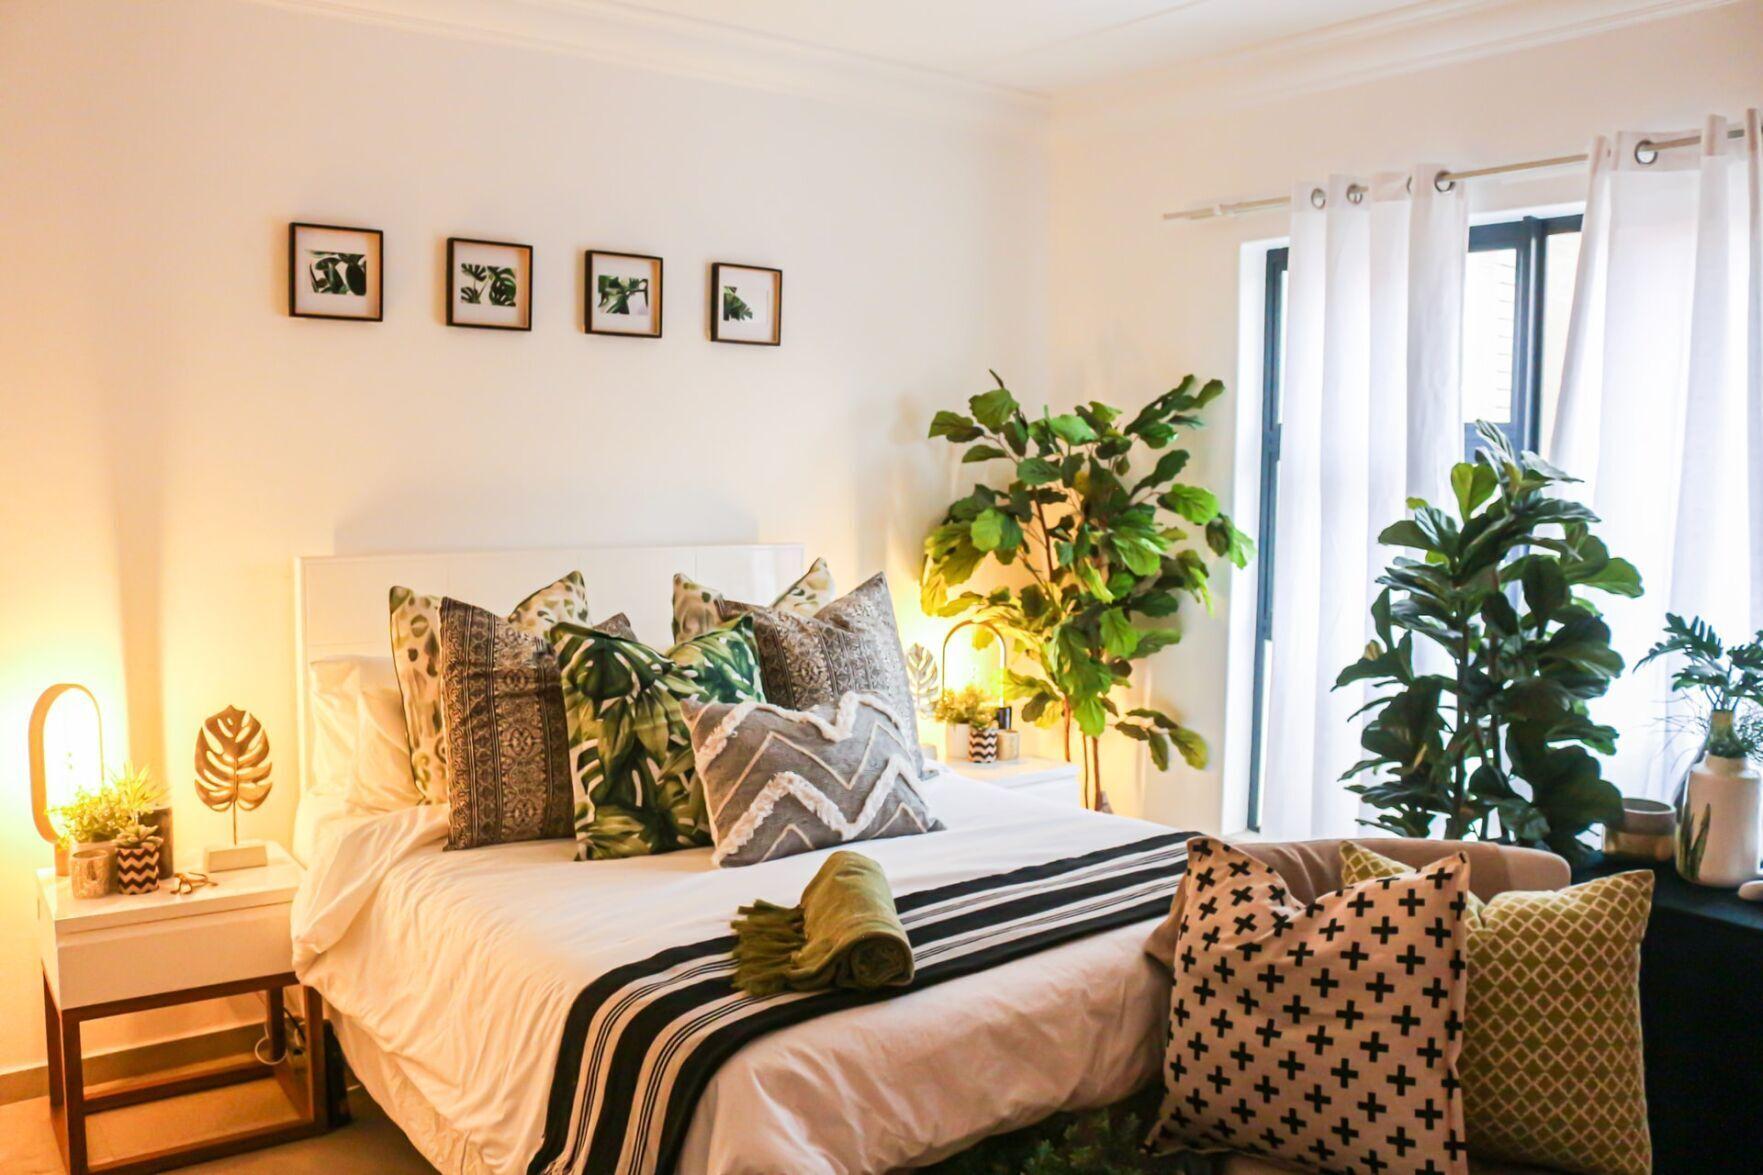 These TikTok guest room ideas are perfect for holiday visitors